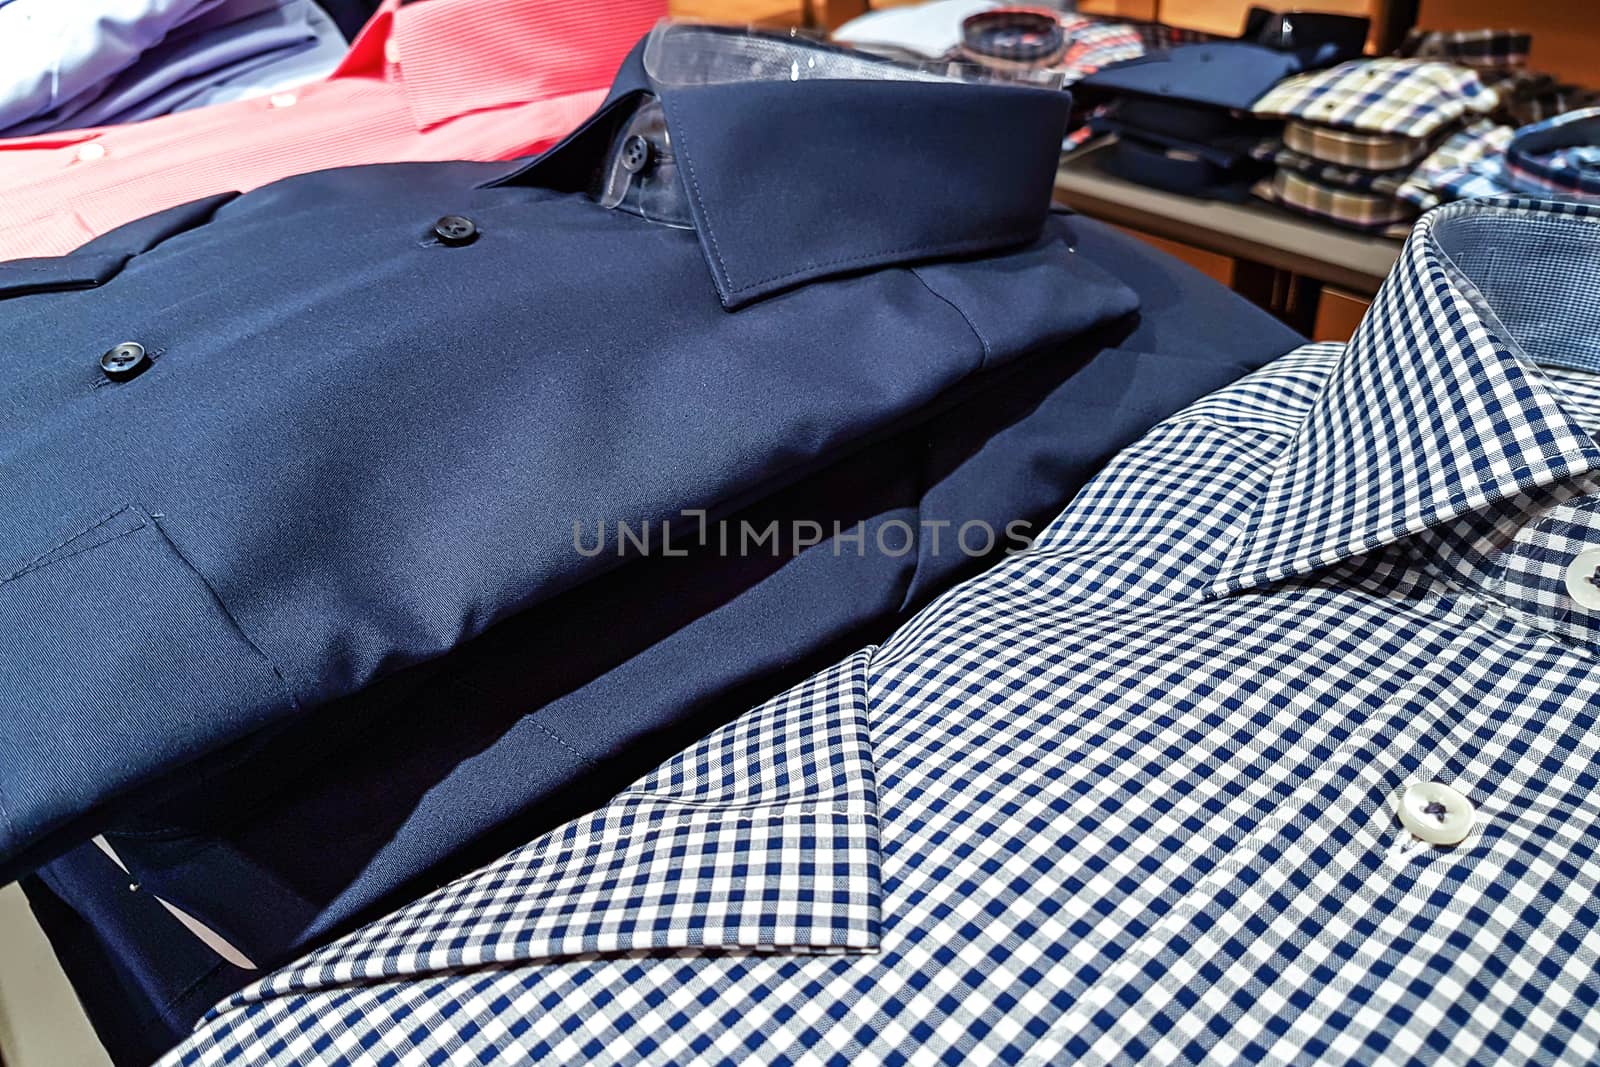 Clothing store - fashionable and elegant shirts for men in a row for sale.